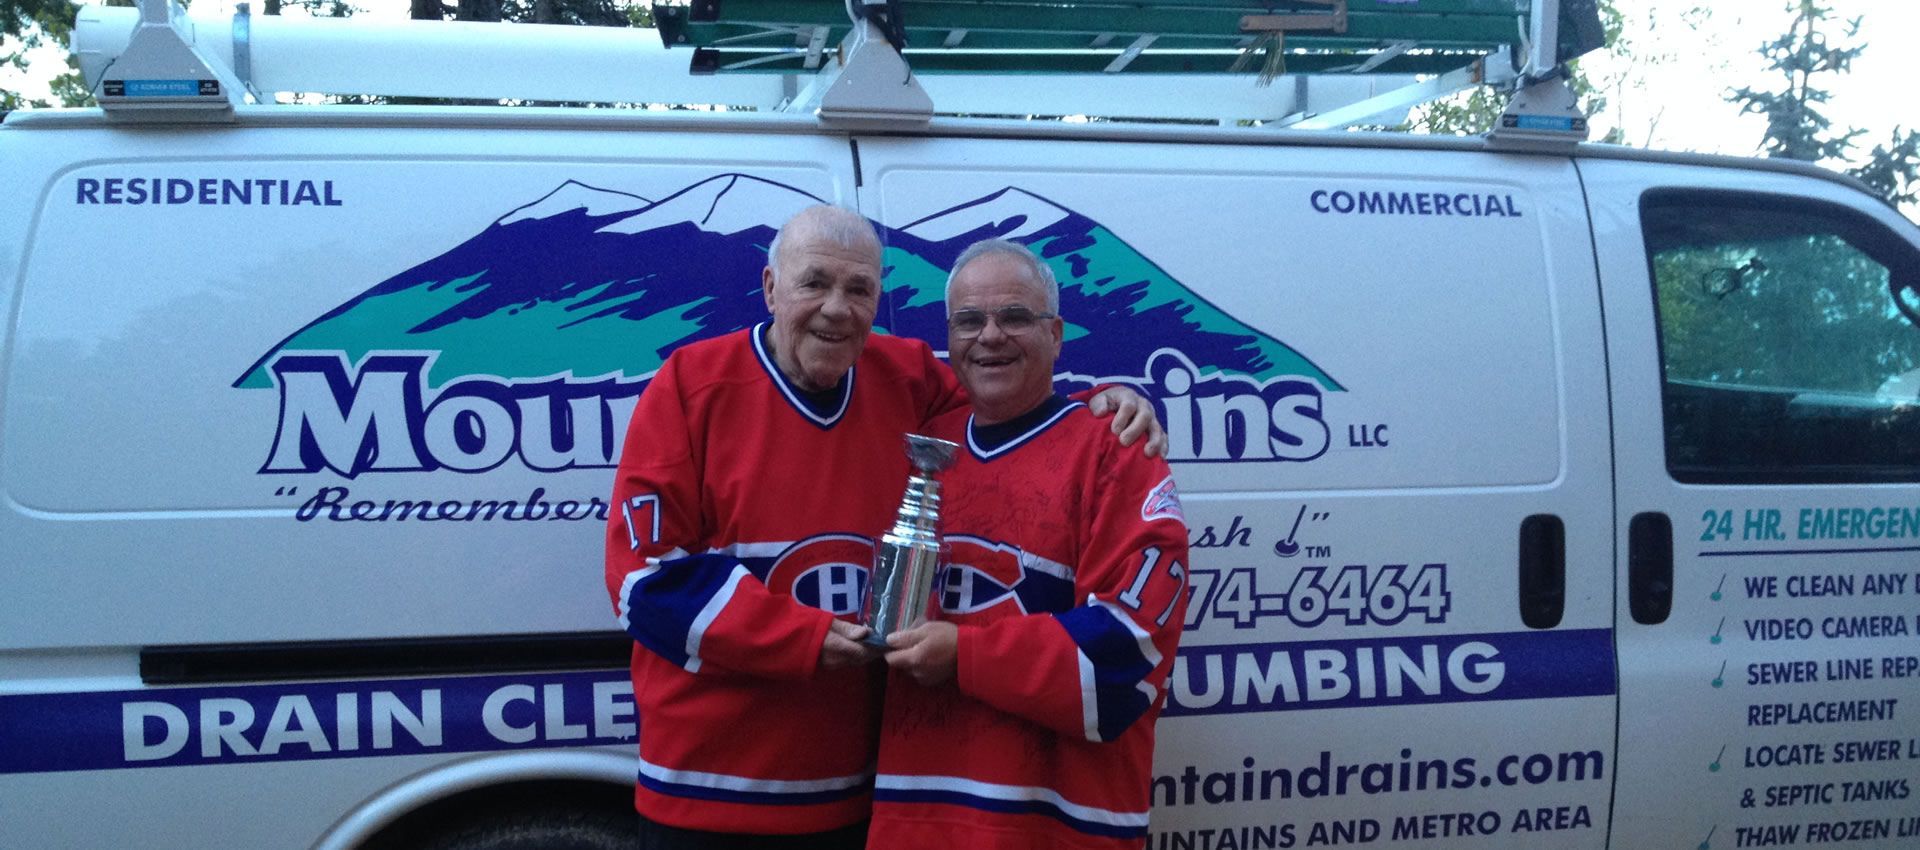 Two Senior Citizen Holding a Trophy - Evergreen, CO - Mountain Drains LLC